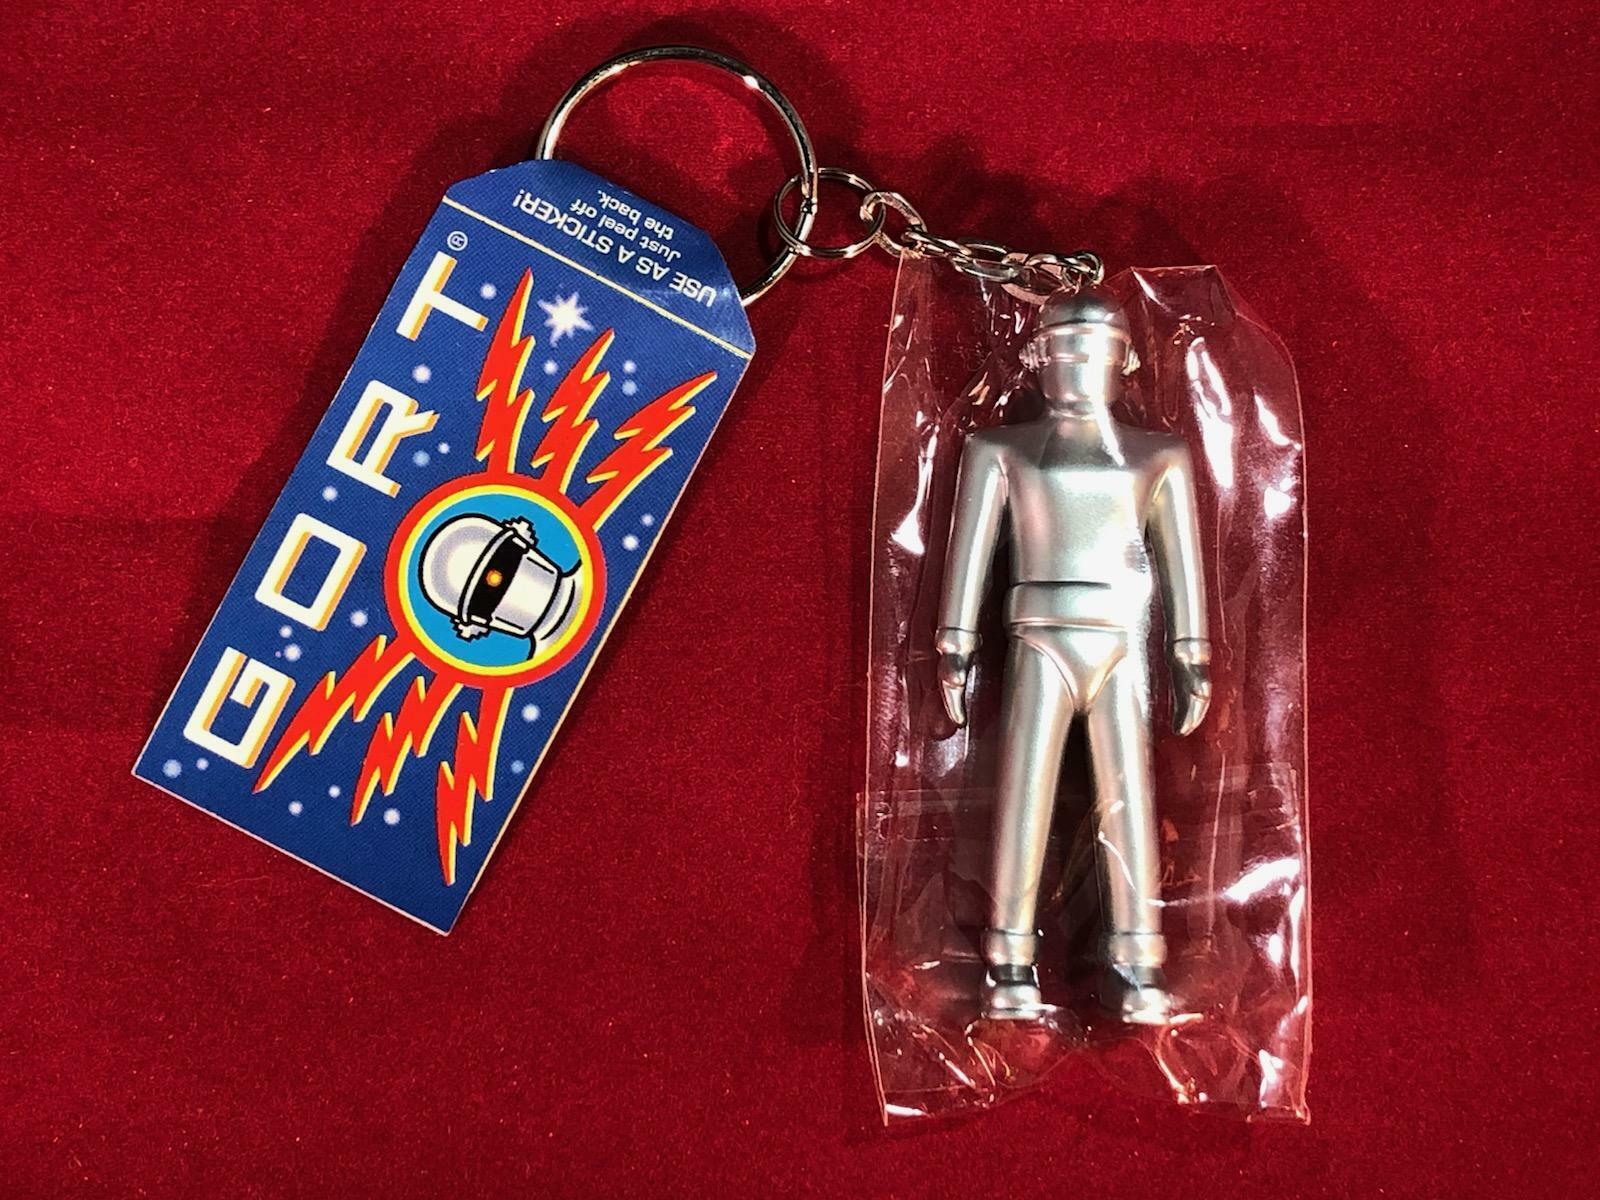 The Day the Earth Stood Still 1 GORT Galactic Policeman Key 